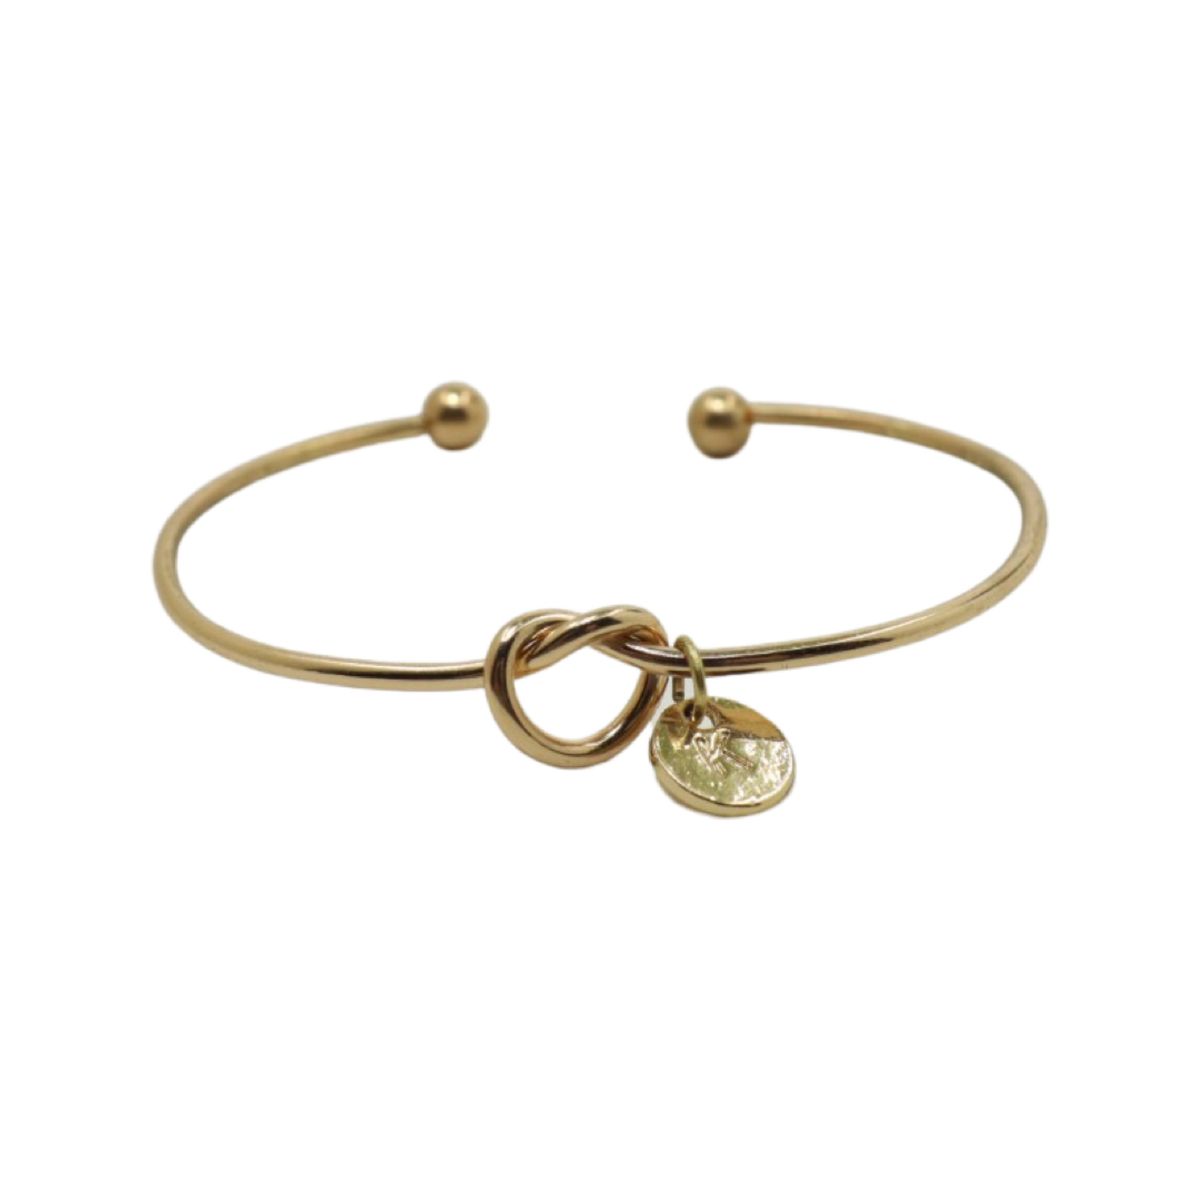 Bracelet Initial Charms Silver/gold Plate Bangle For Women - Gold | Buy ...